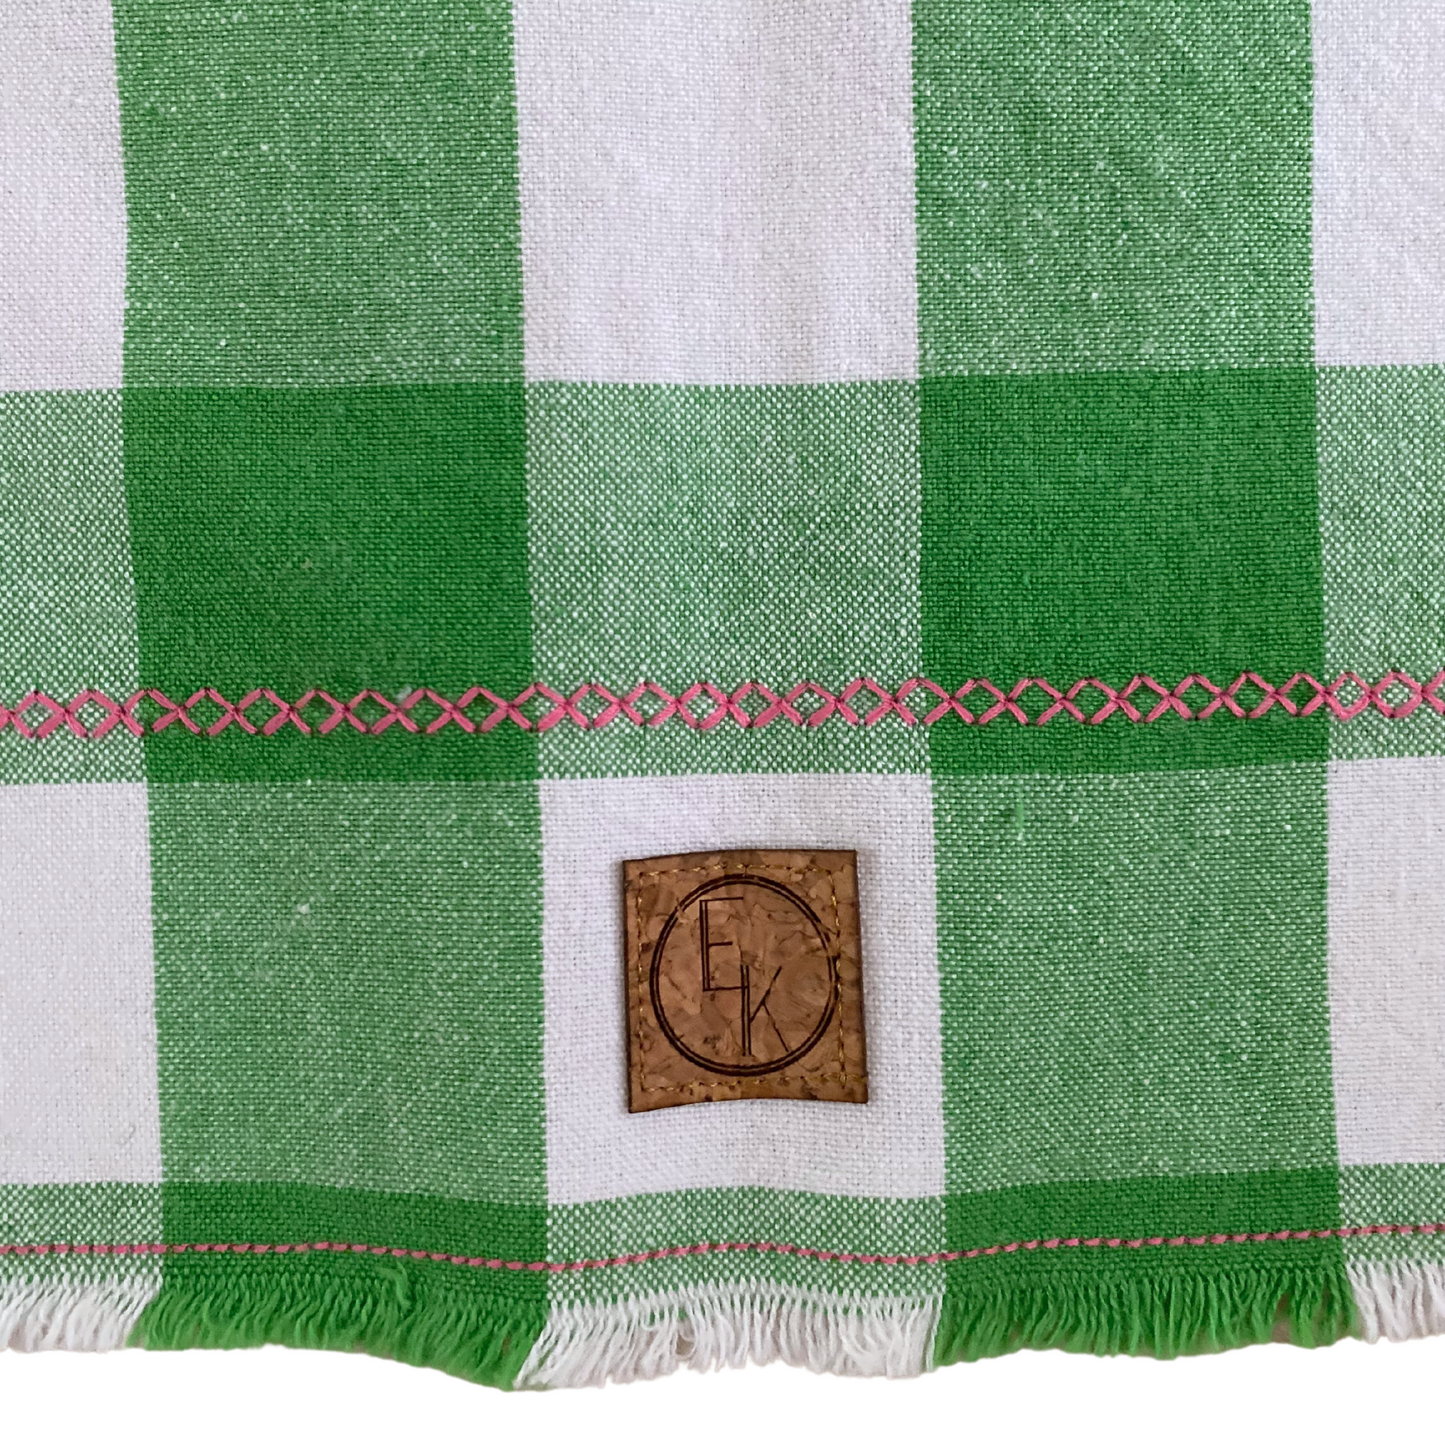 Green Plaid with Pink Tea Towel